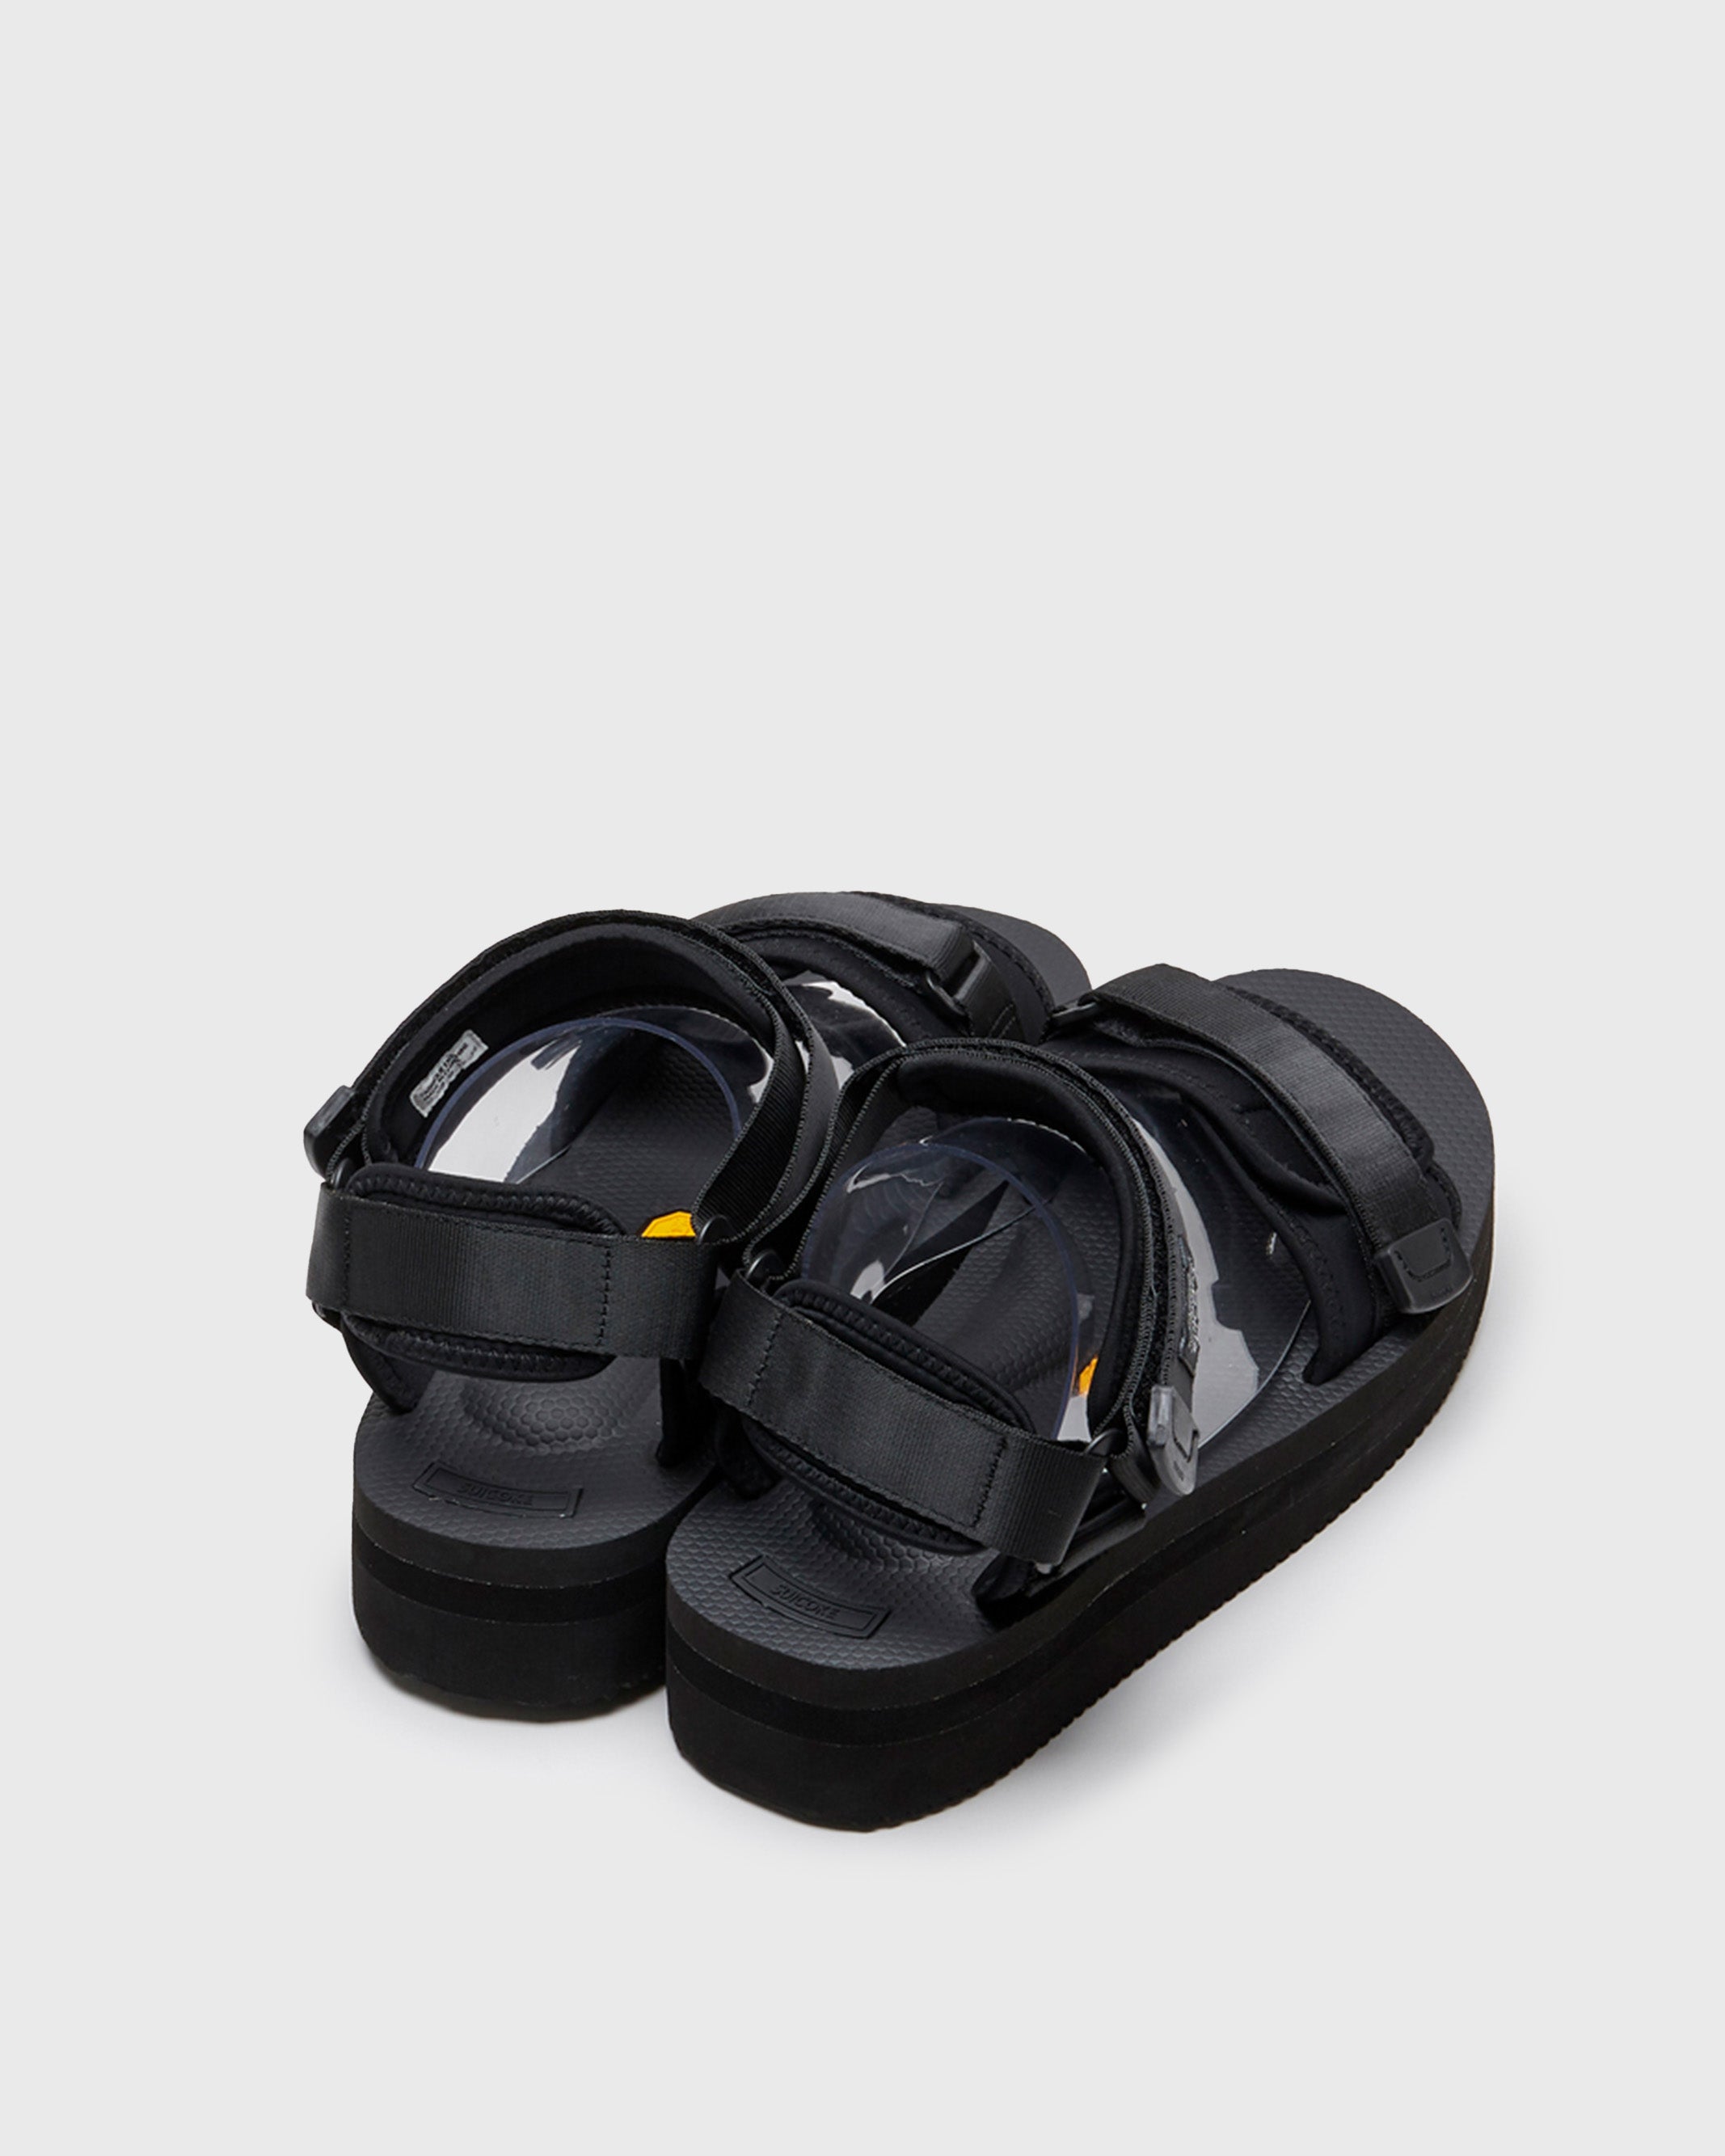 SUICOKE CEL-VPO in Black OG-064VPO | Shop from eightywingold an official brand partner for SUICOKE Canada and US.